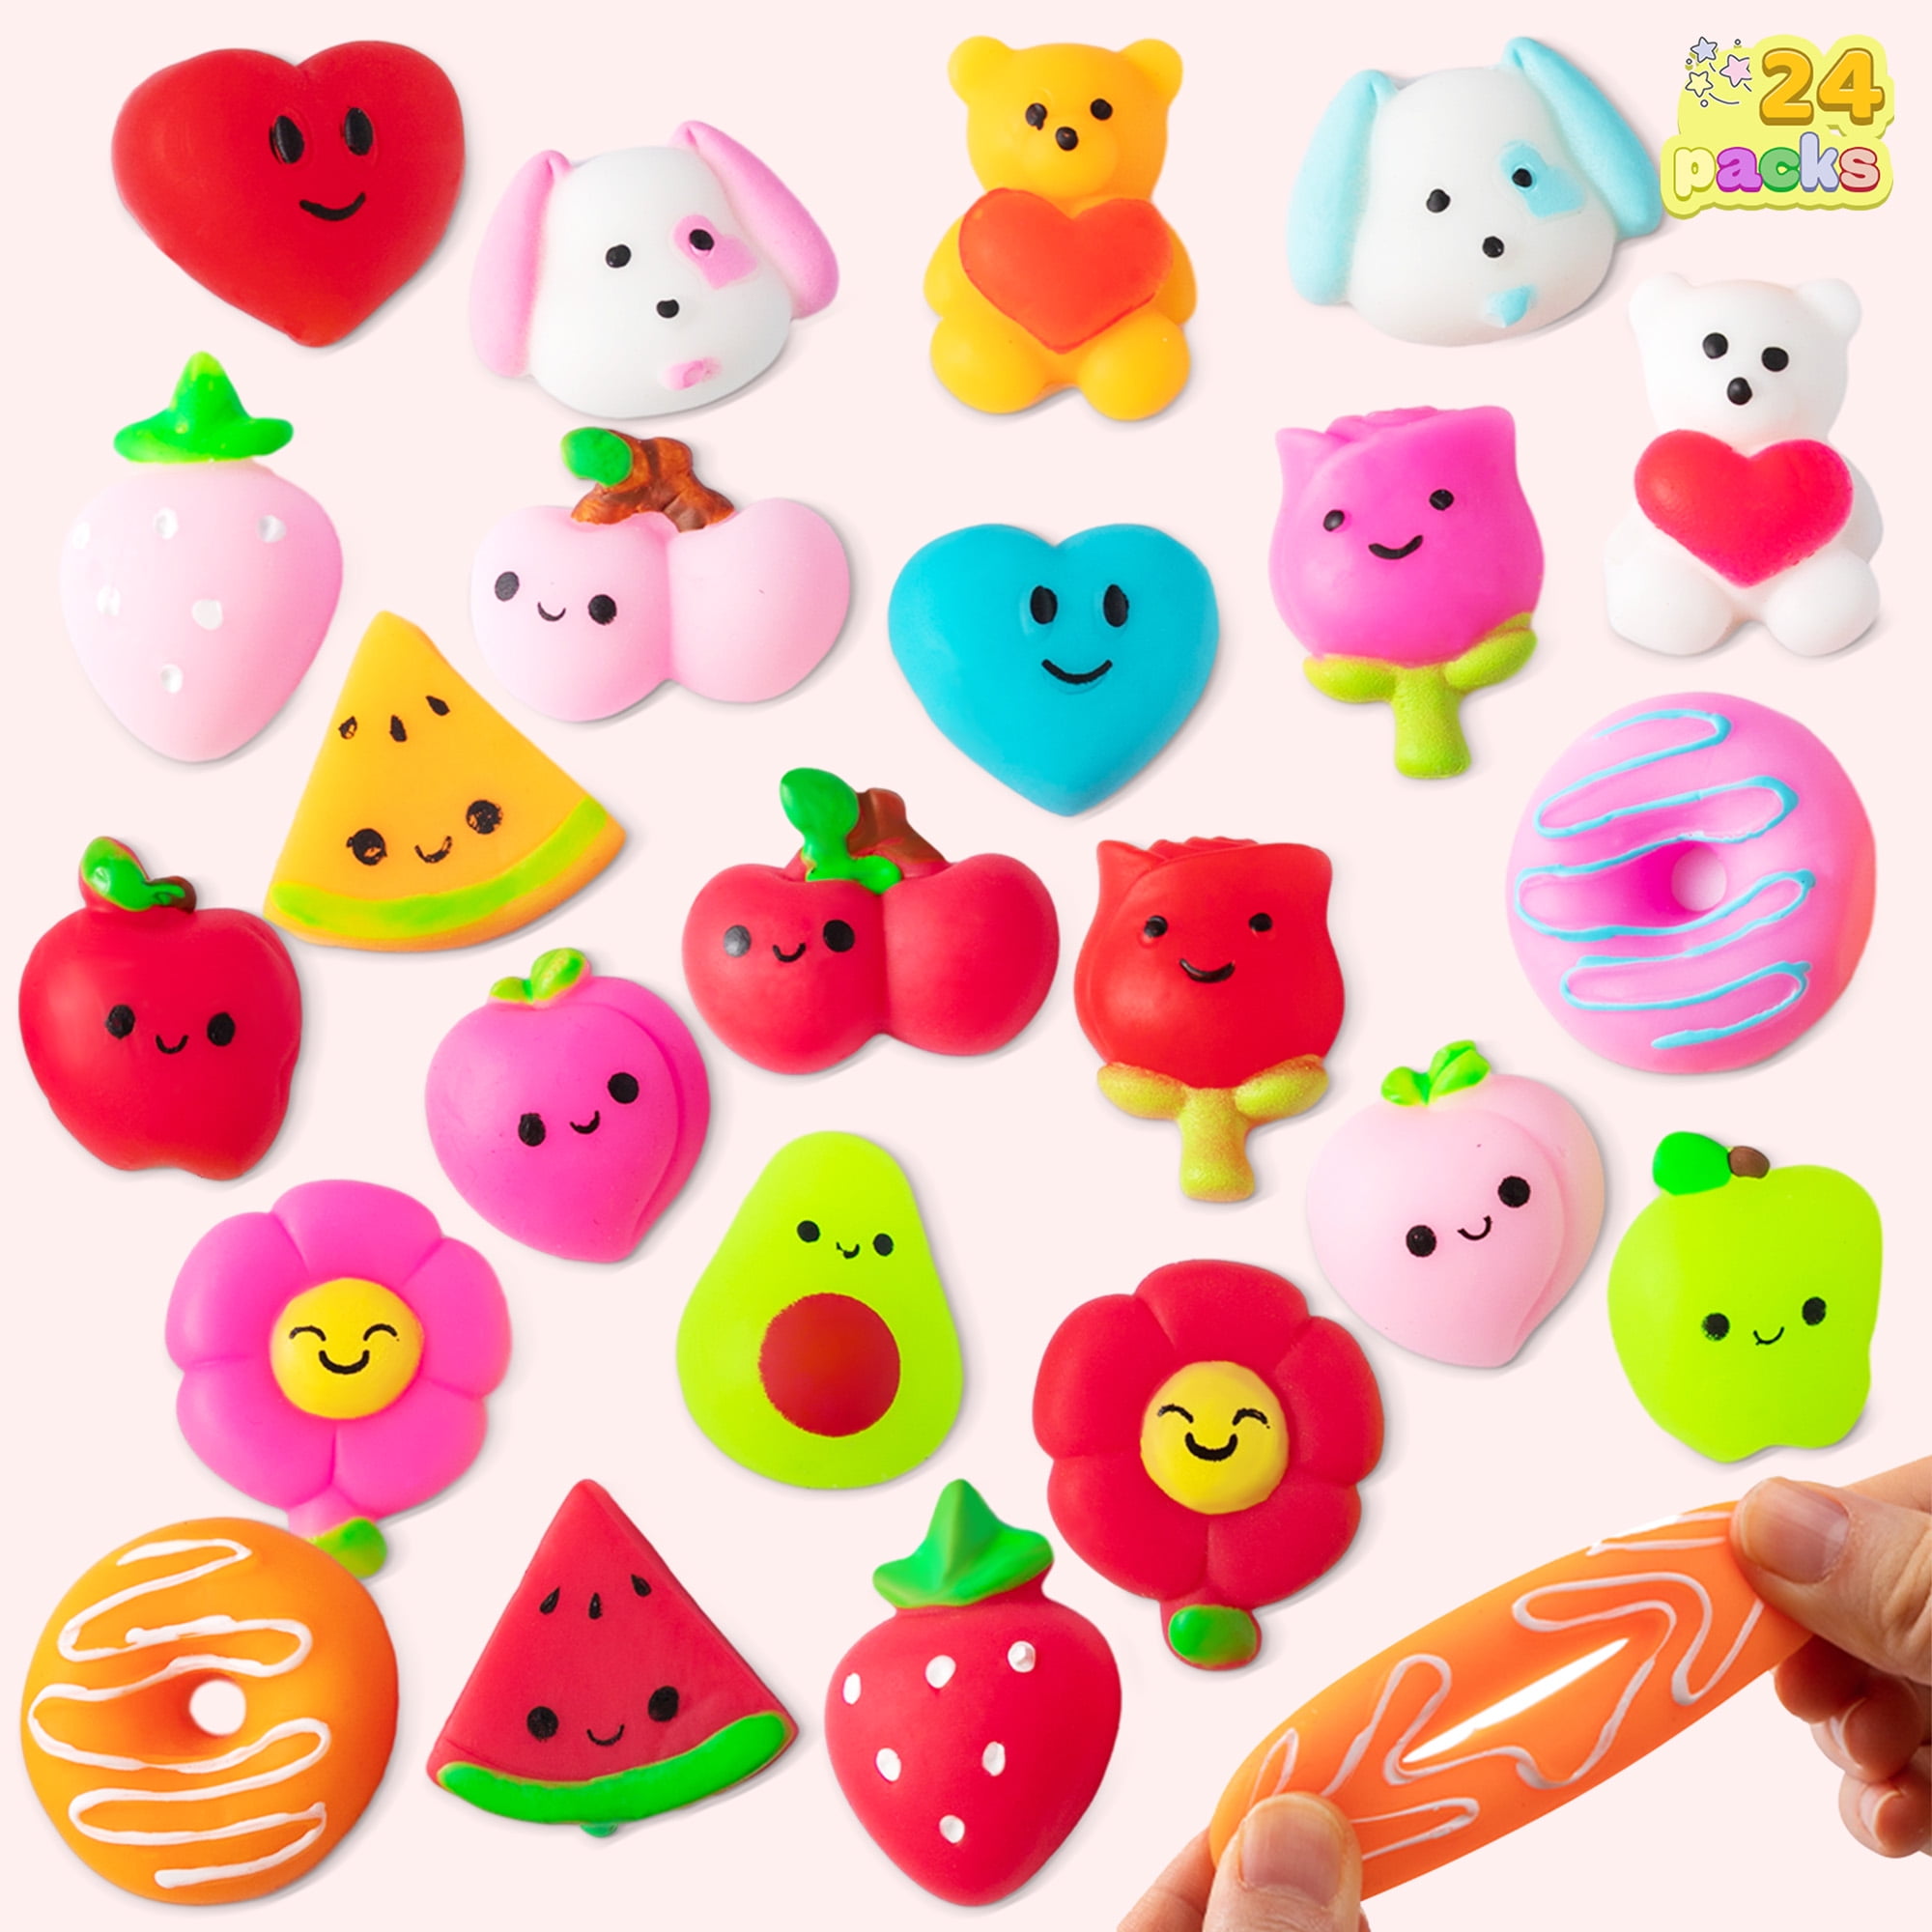  JOYIN 24 PCS Valentine's Day Squishy Toy Bear Toys with Card,  Squeeze Stretchy Stress Relief & for Valentine's Classroom Exchange,  Valentine's Party Favors, Fidget Toys for Boys and Girls : Toys